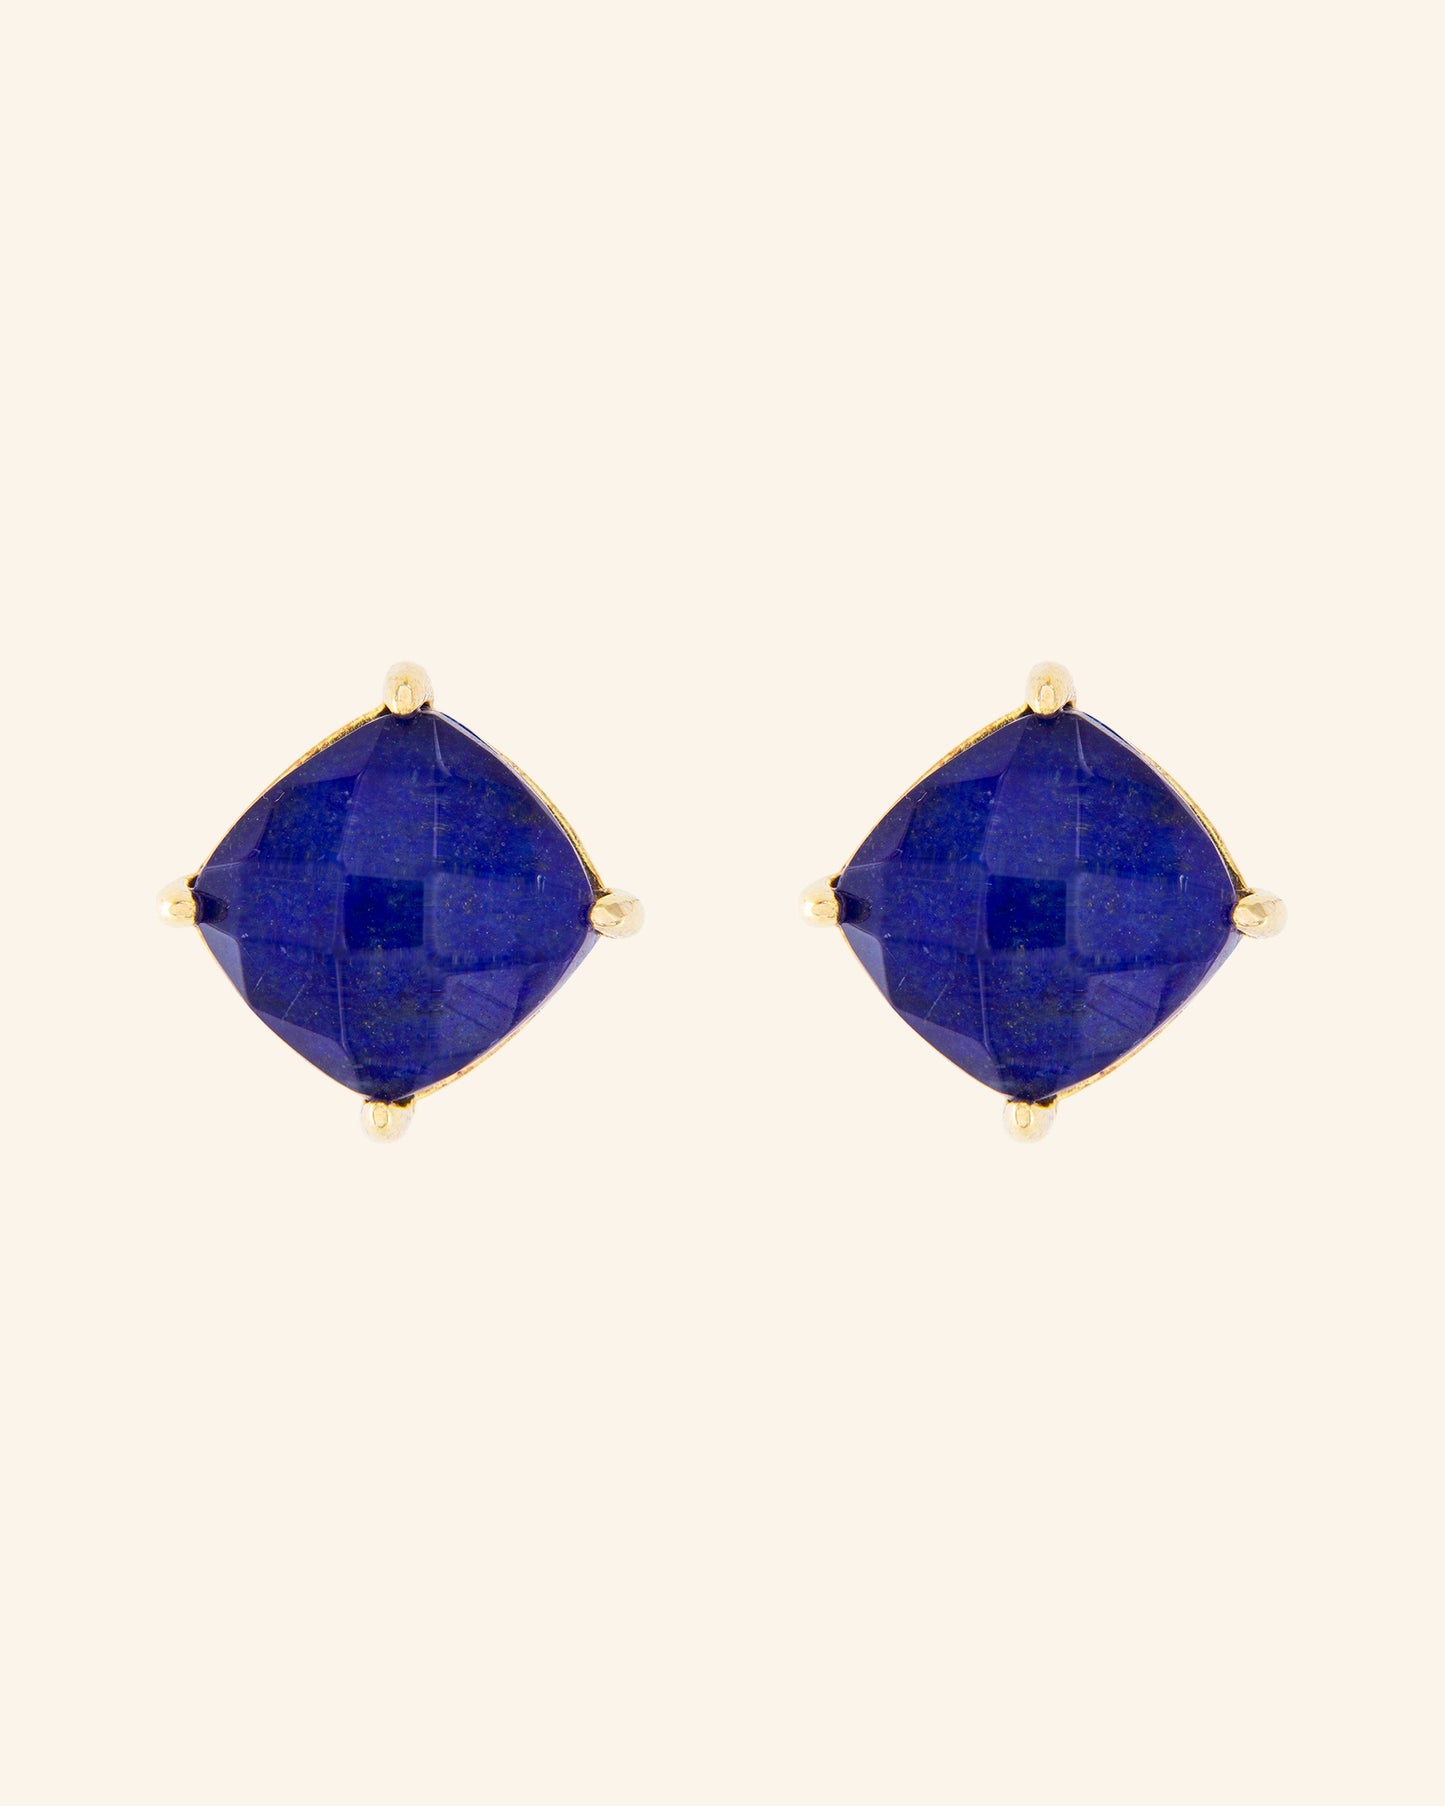 Big Candy earrings with lapis lazuli and quartz doublet